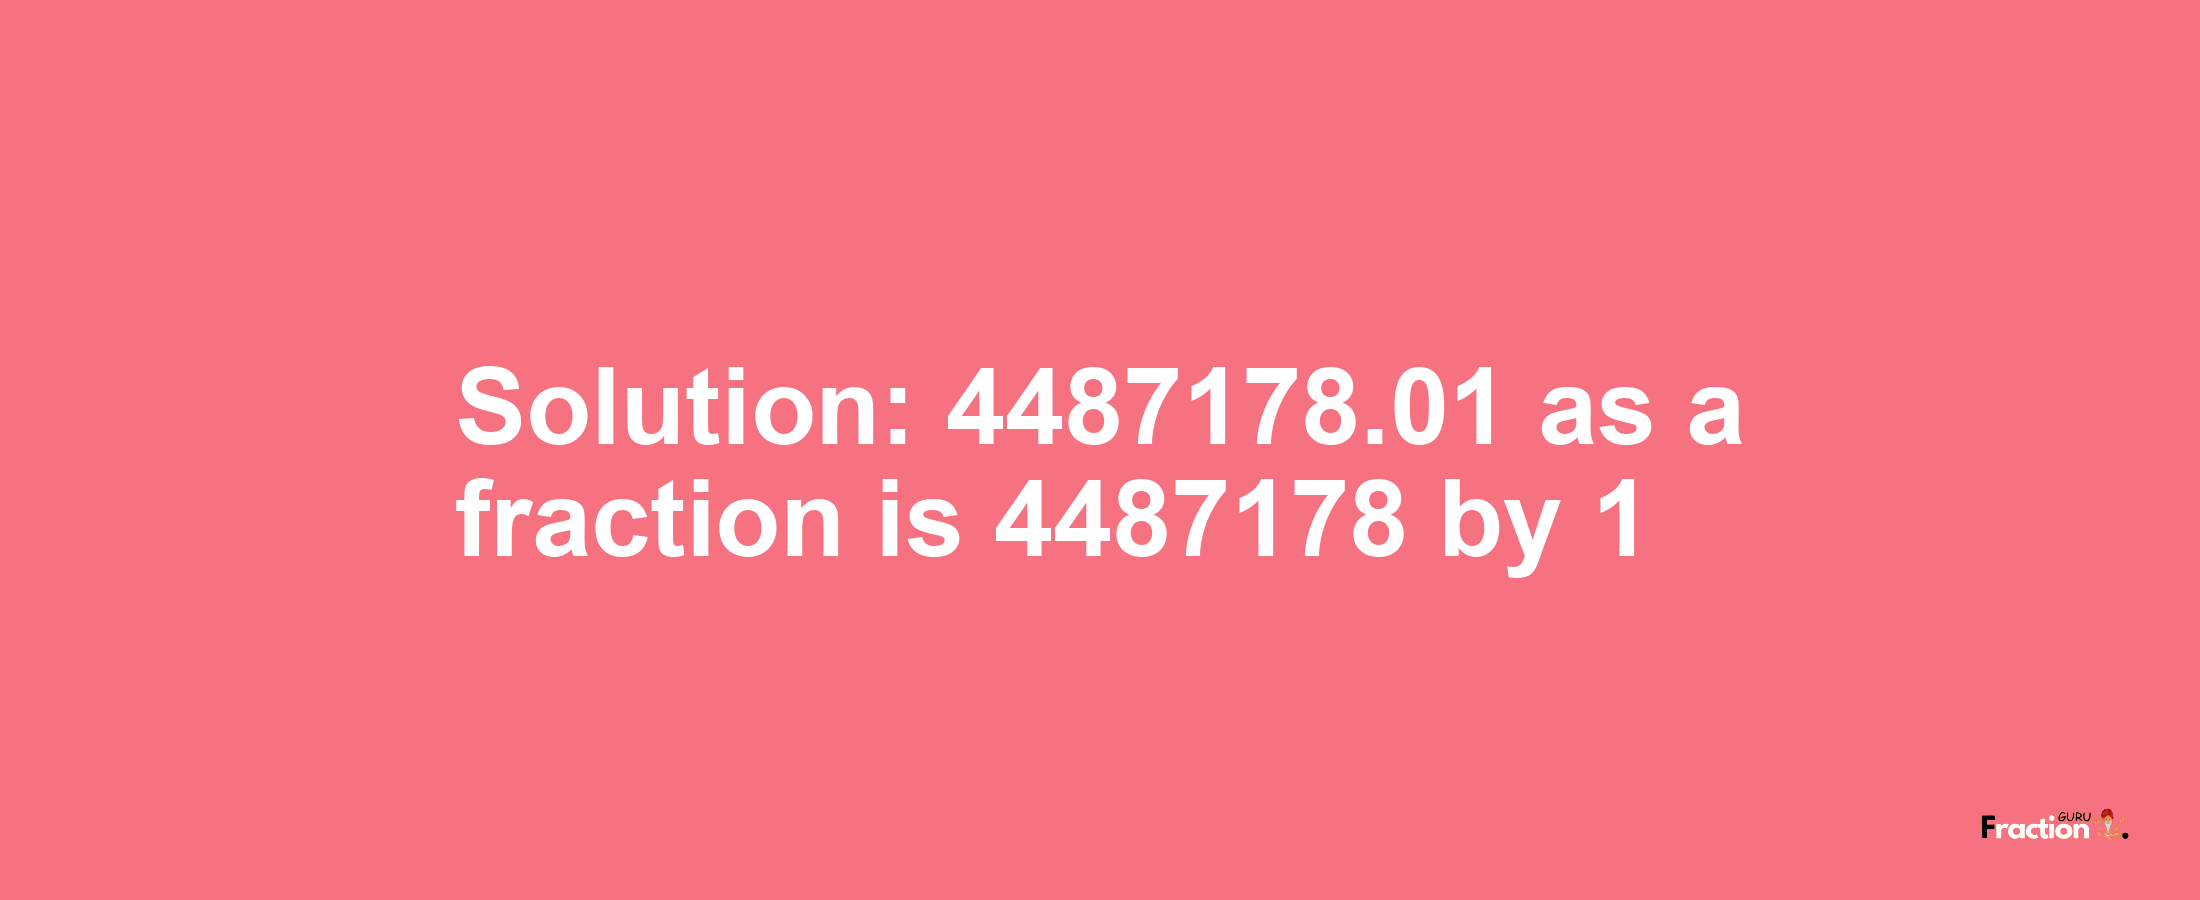 Solution:4487178.01 as a fraction is 4487178/1